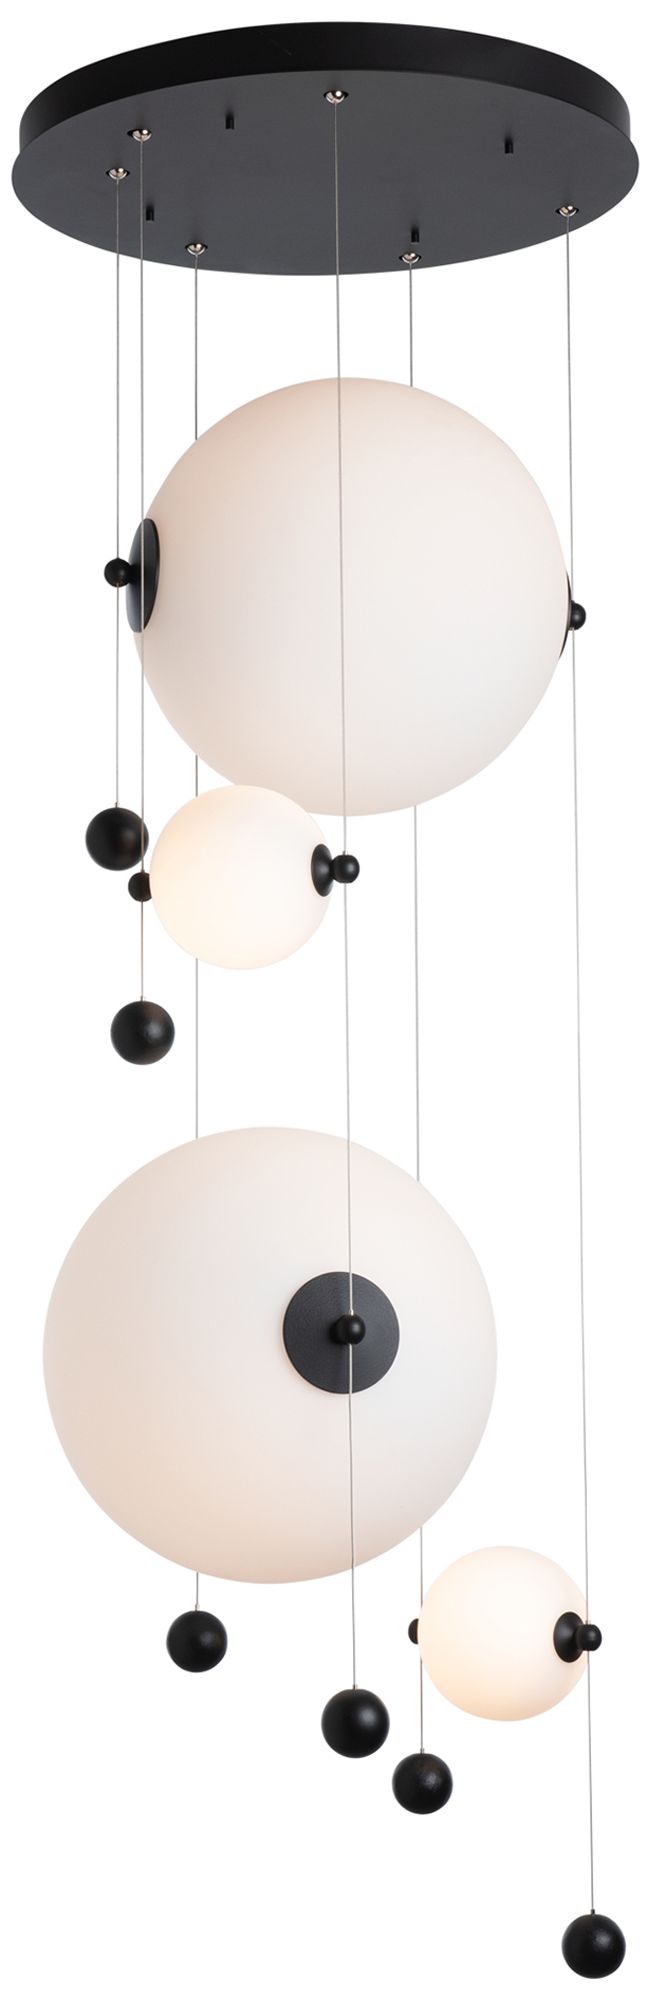 Abacus 4-Light Round LED Pendant - Black - Opal Glass - Standard Height